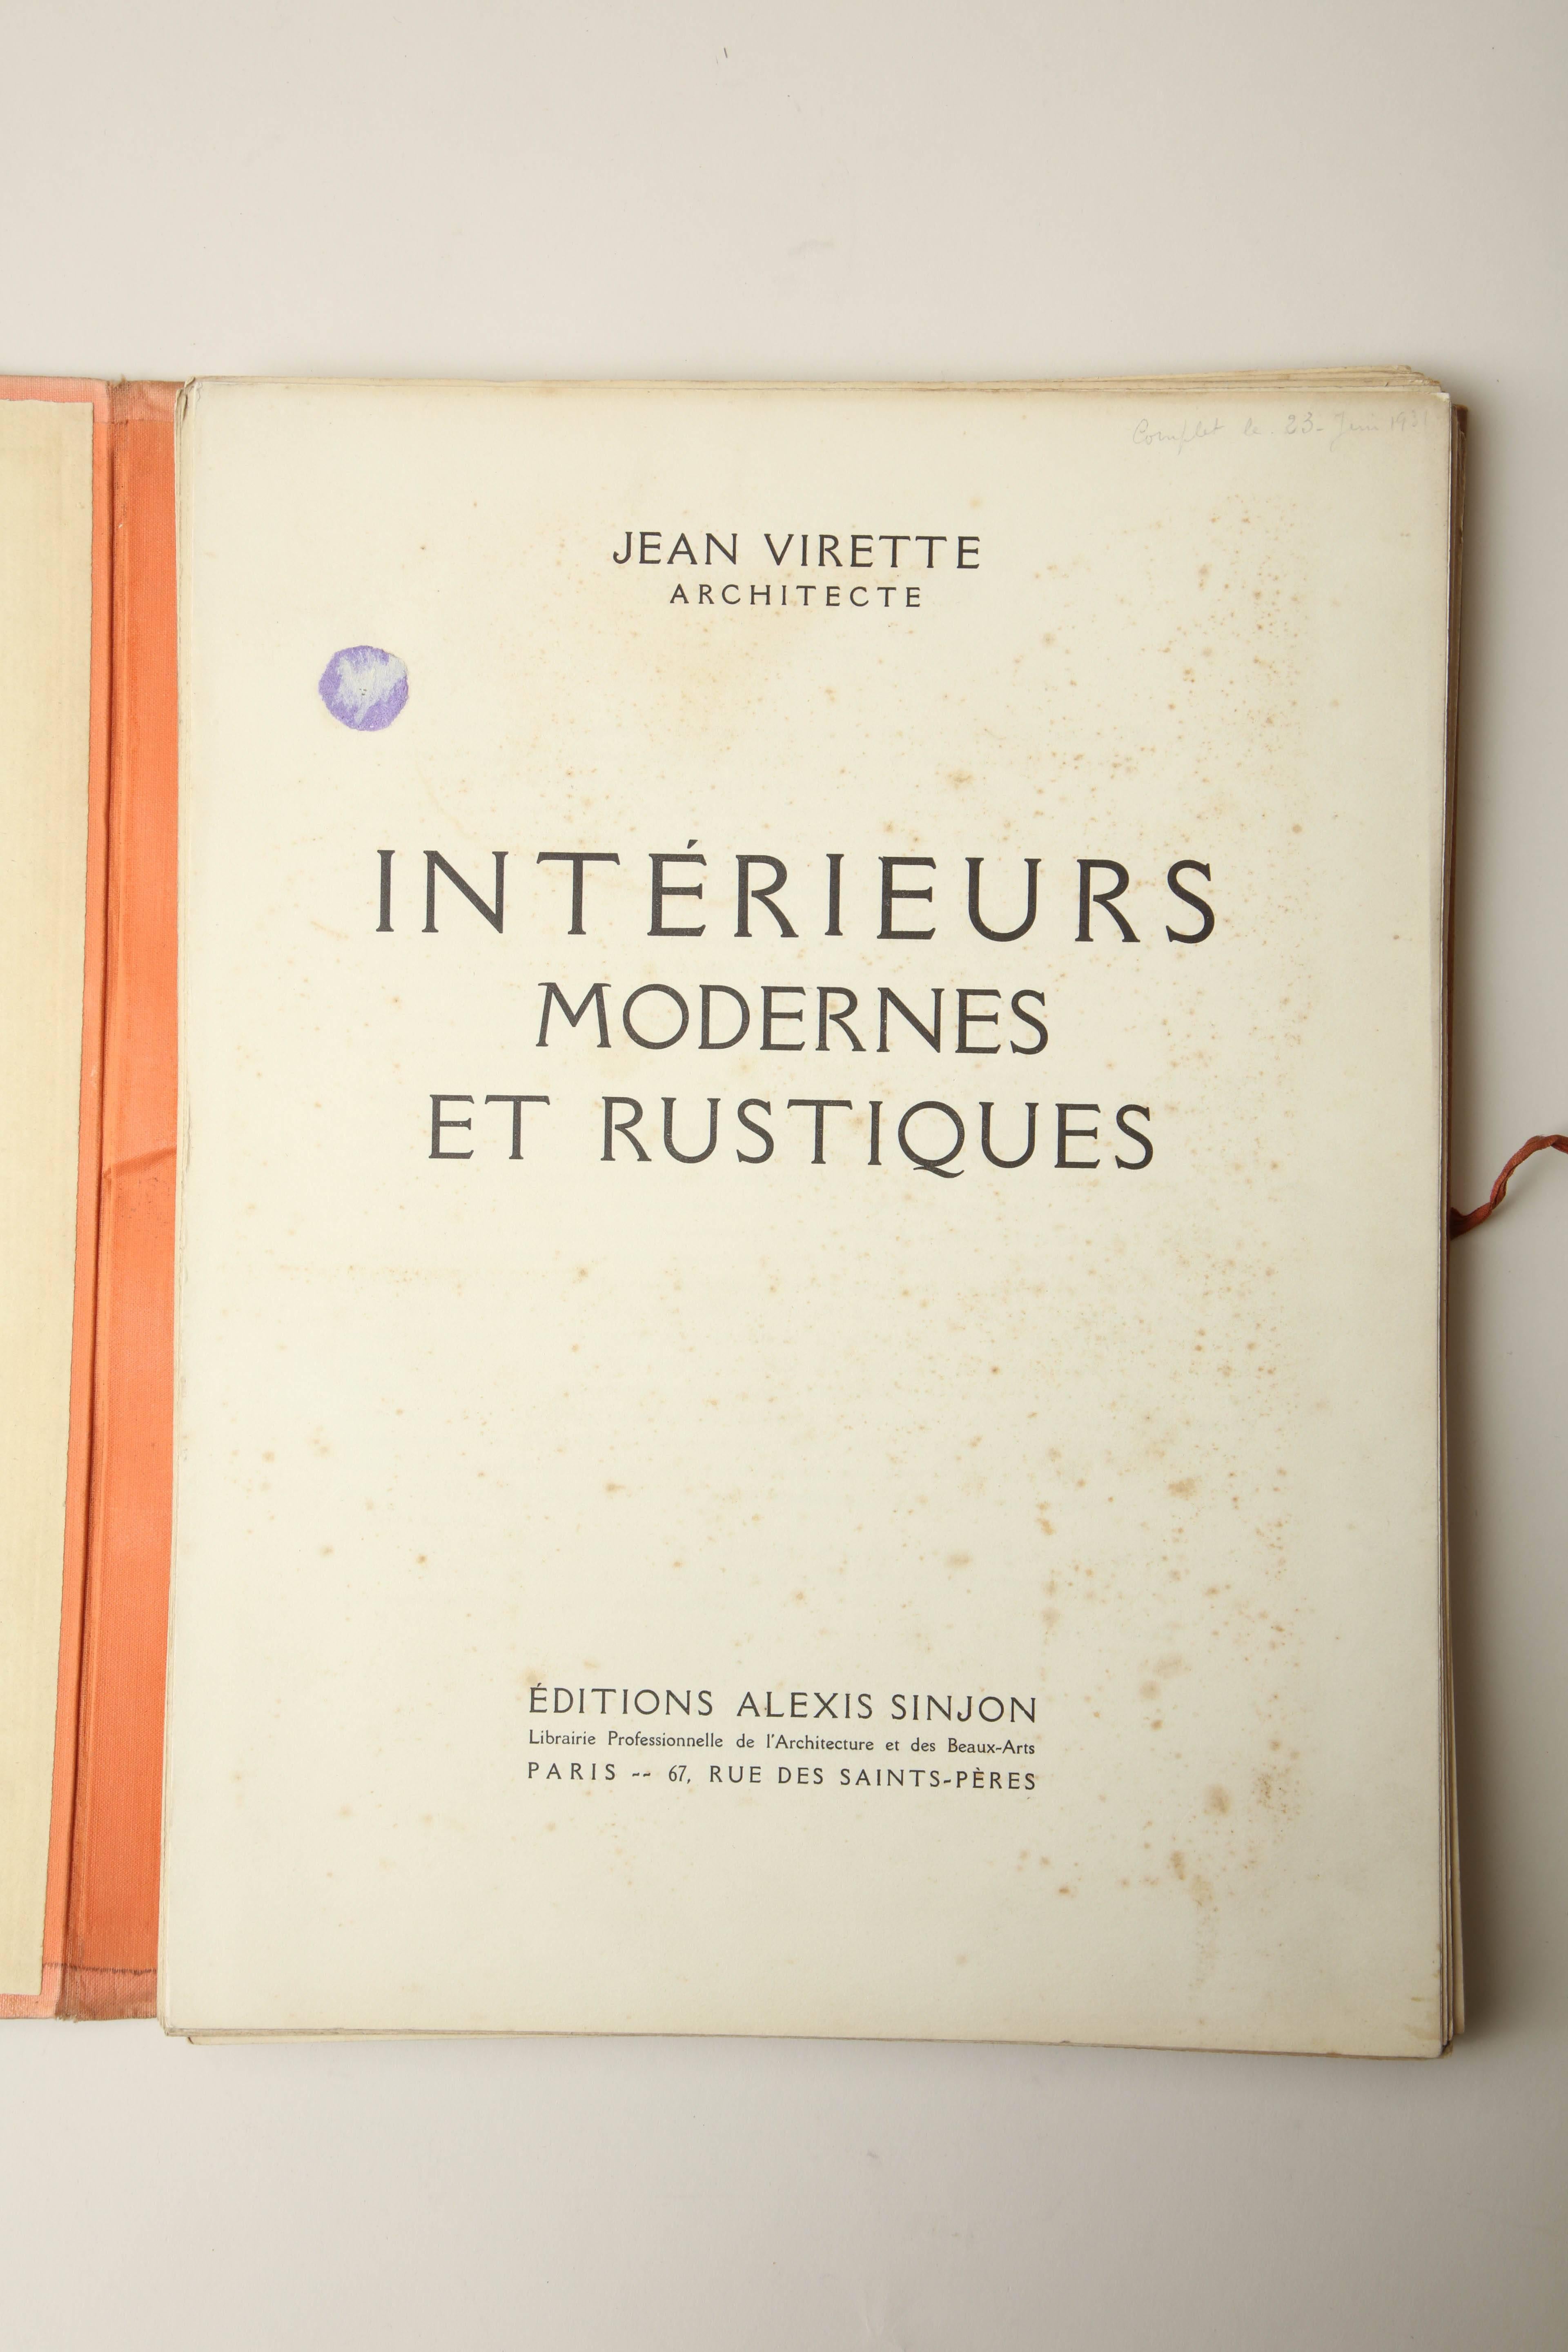 Interieurs Modernes and Rustiques by Jean Virette In Good Condition For Sale In New York, NY